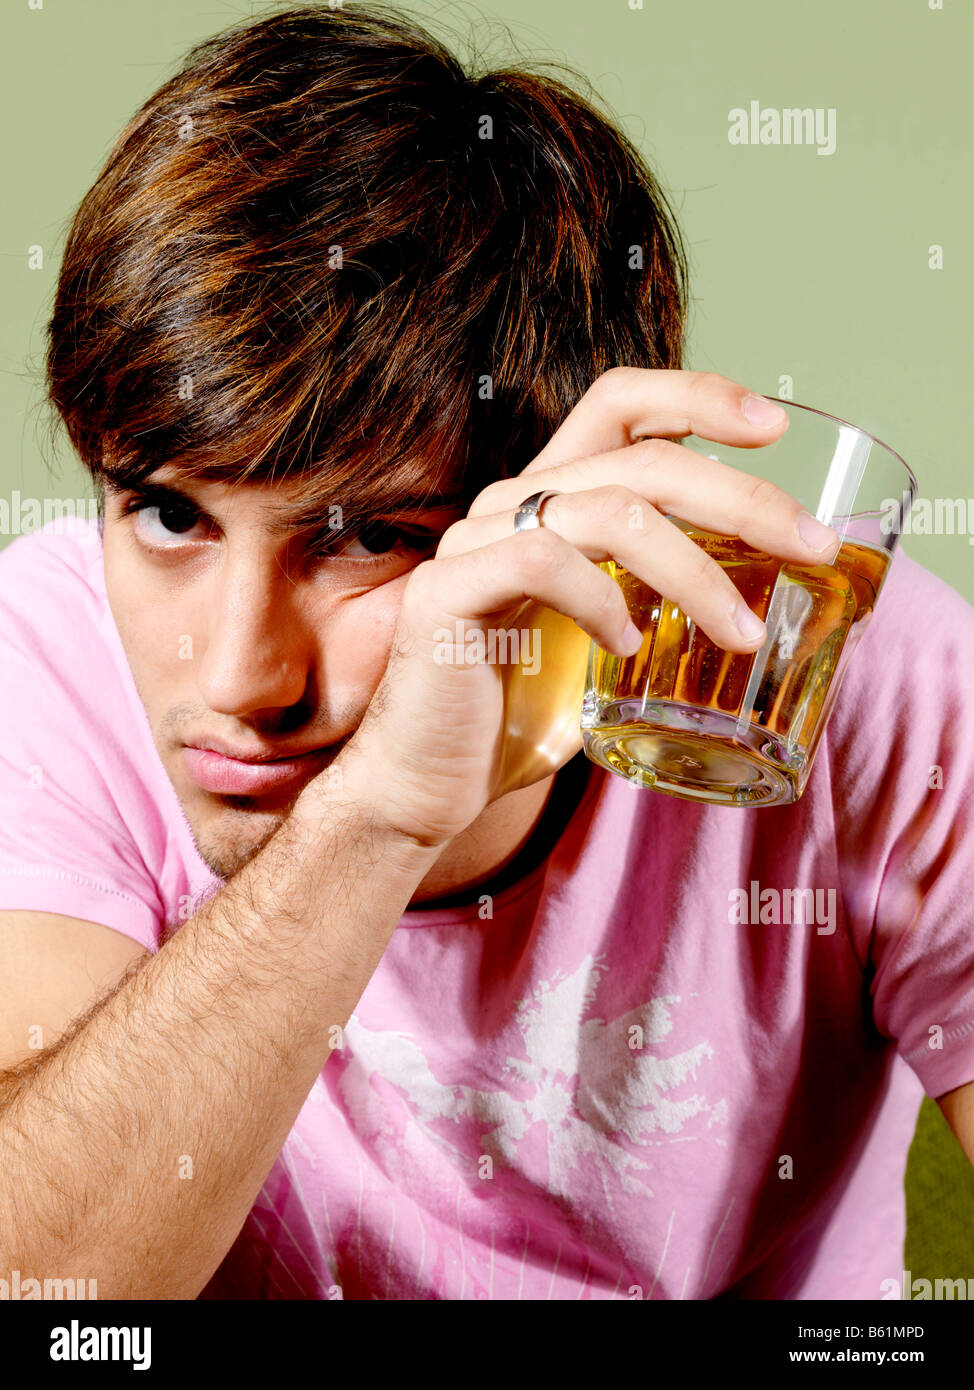 Young Man Drinking Beer Model Released Stock Photo